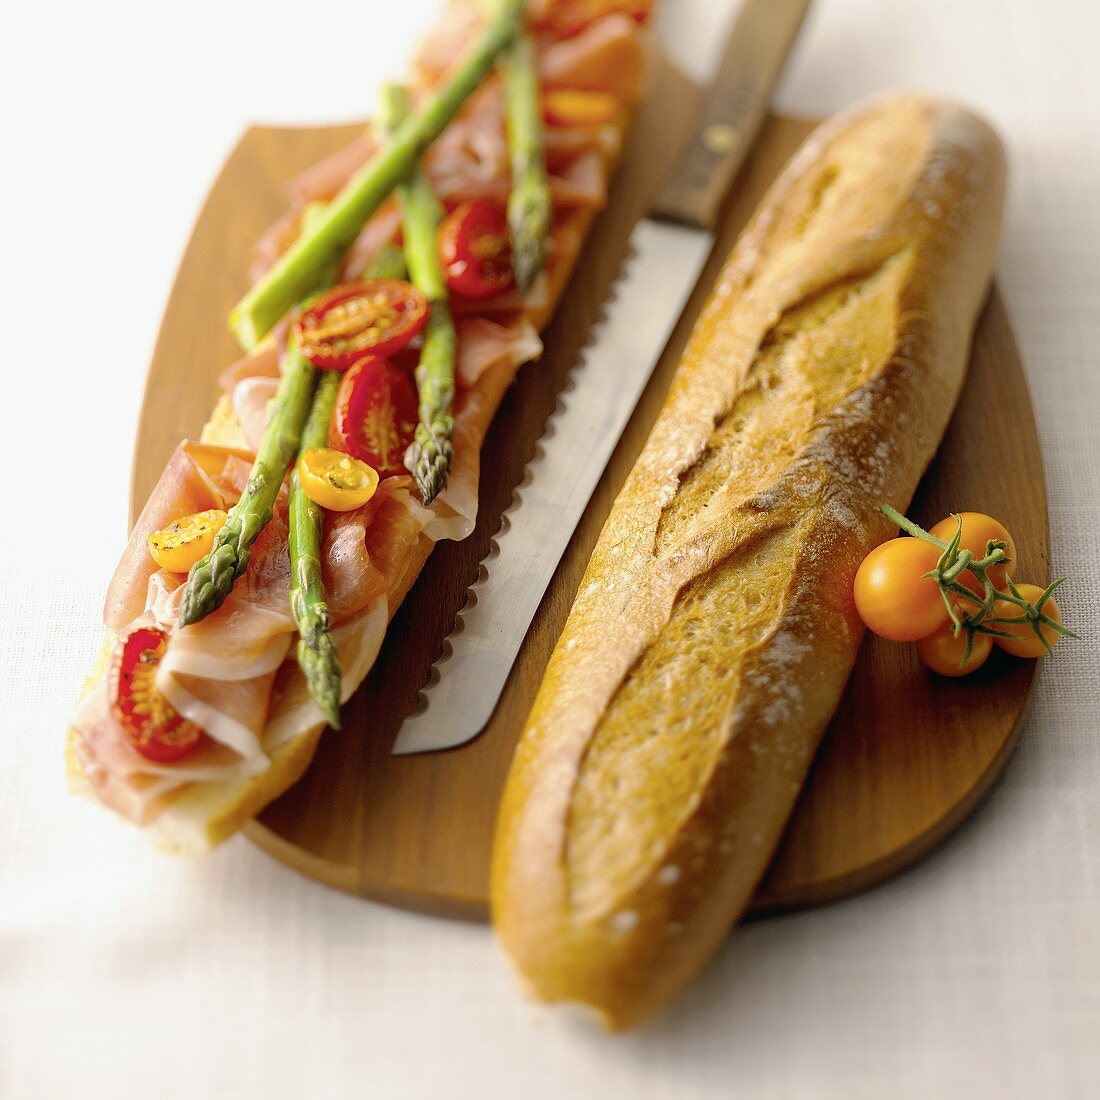 Prosciutto, Asparagus and Tomatoes on a Baguette